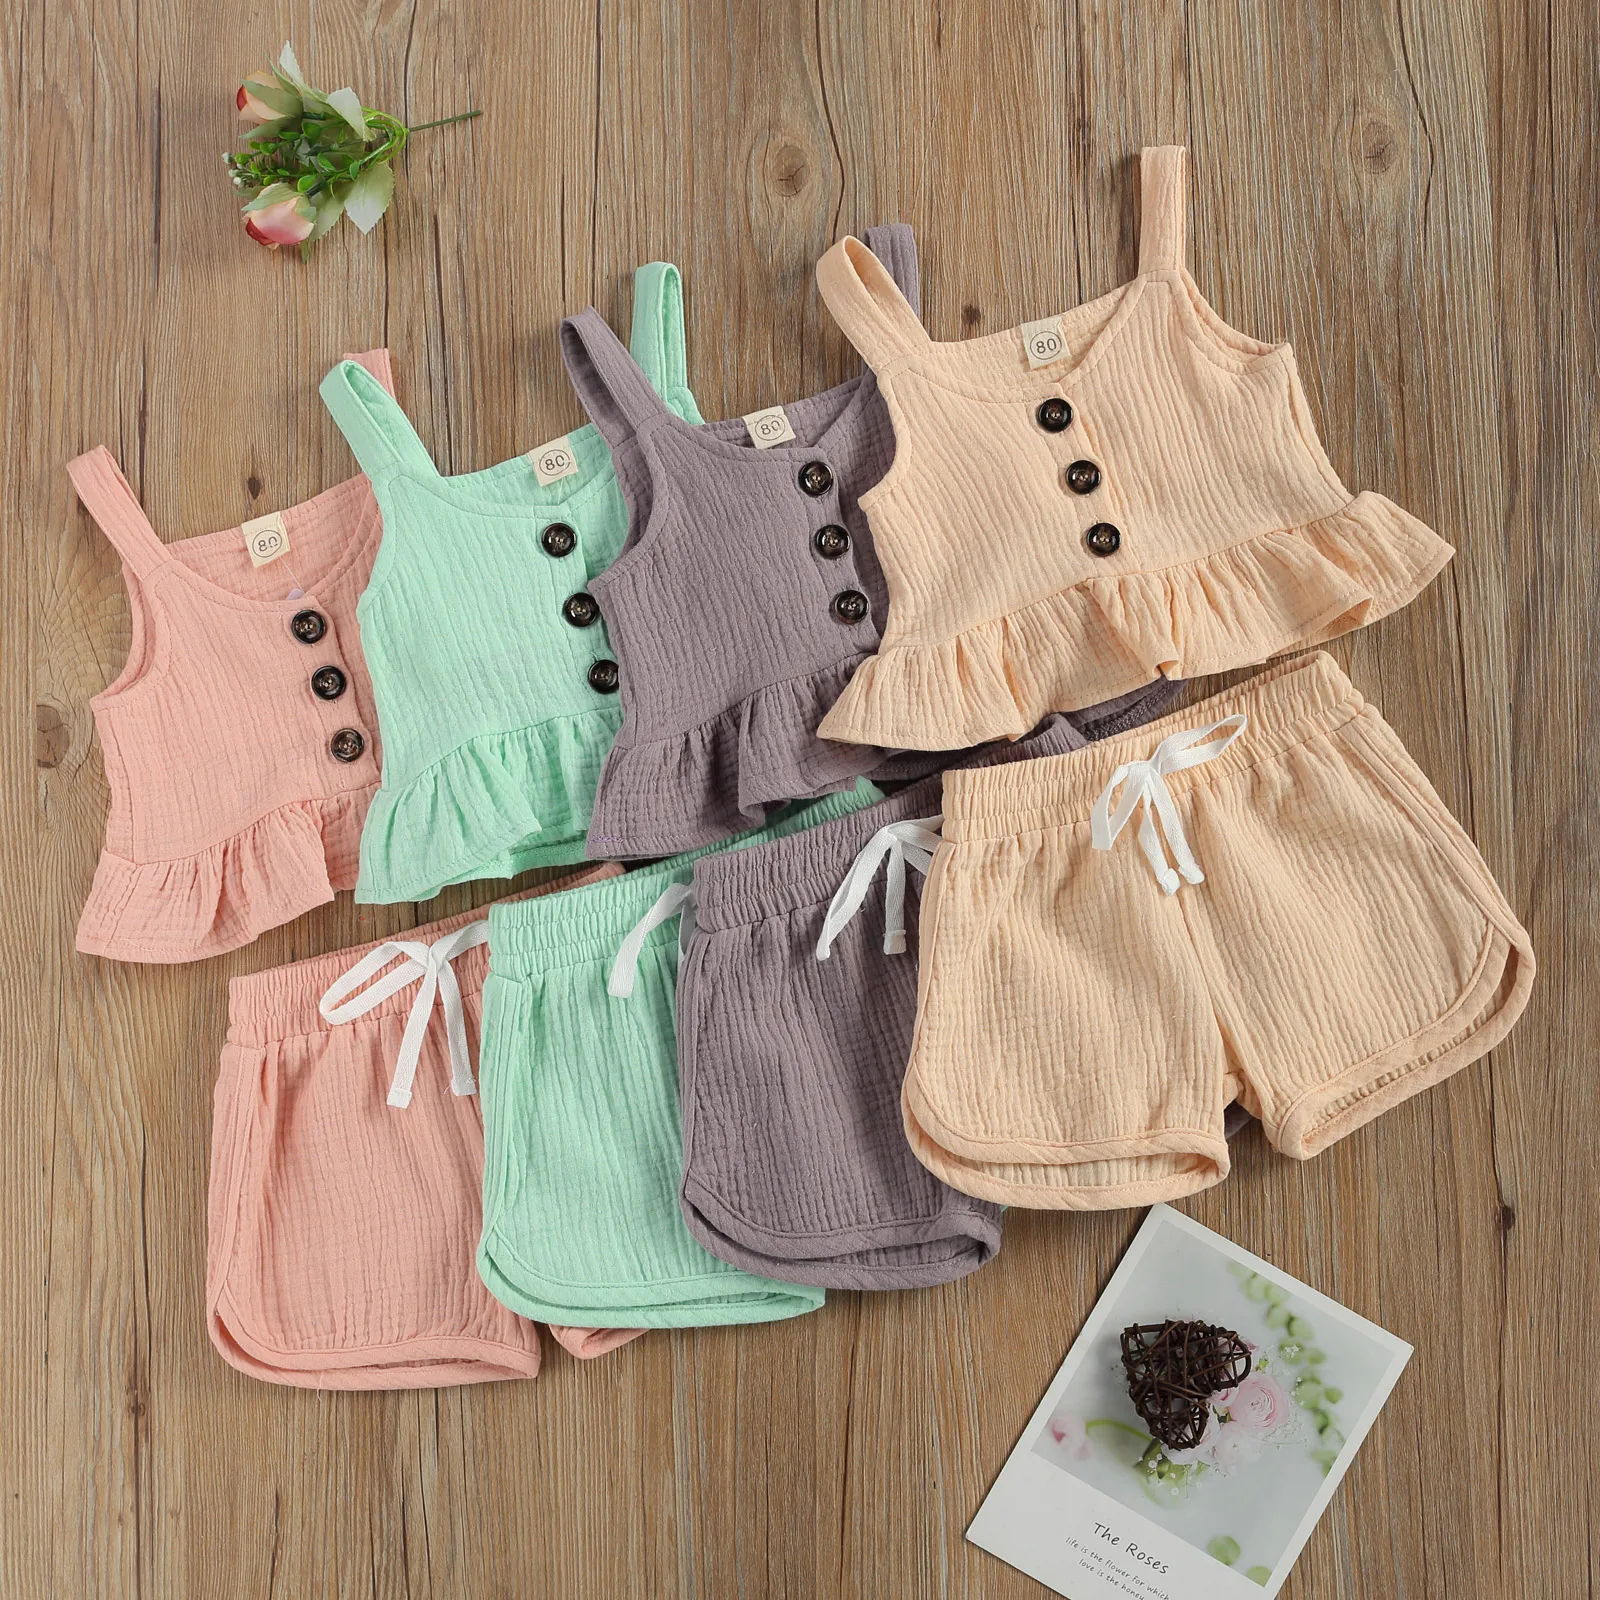 newborn baby clothes set girl Infant Baby Girls Casual Two-piece Solid Clothes Set Solid Color Off-the-shoulder Tops + Shorts, Green/ Purple/ Pink/ Nude 6M-4T baby suit